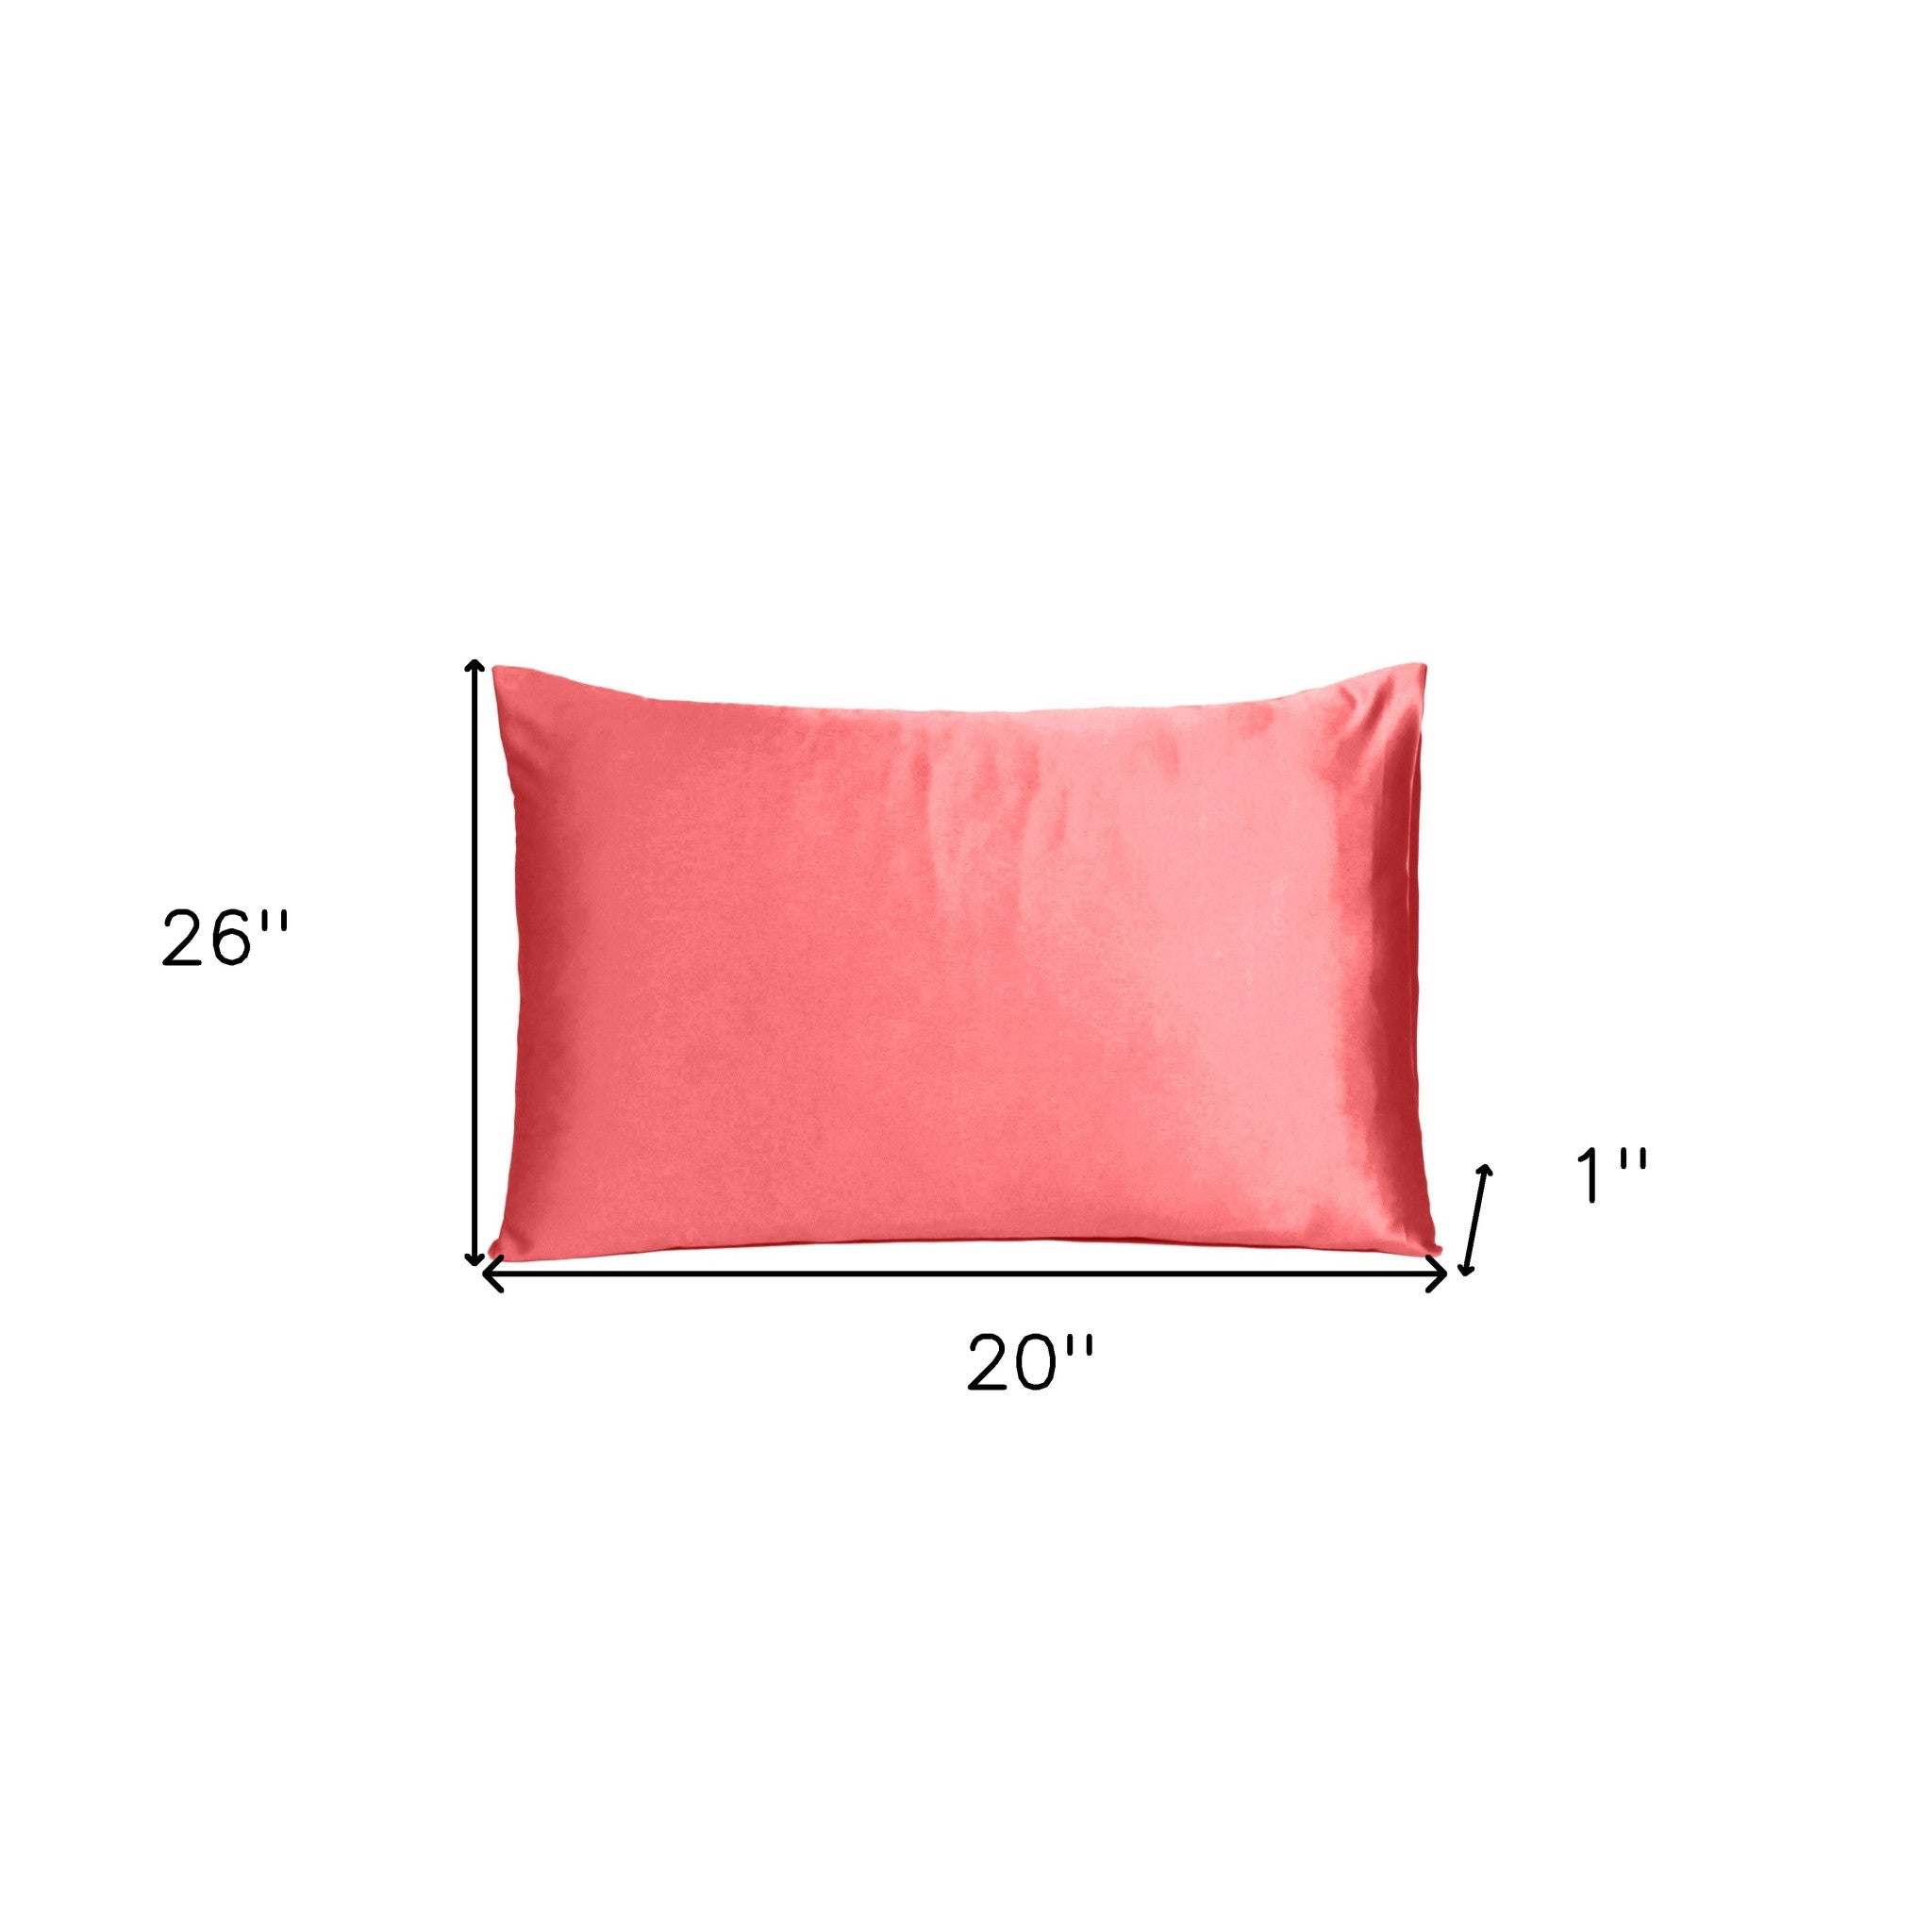 Coral Dreamy Set Of 2 Silky Satin Standard Pillowcases